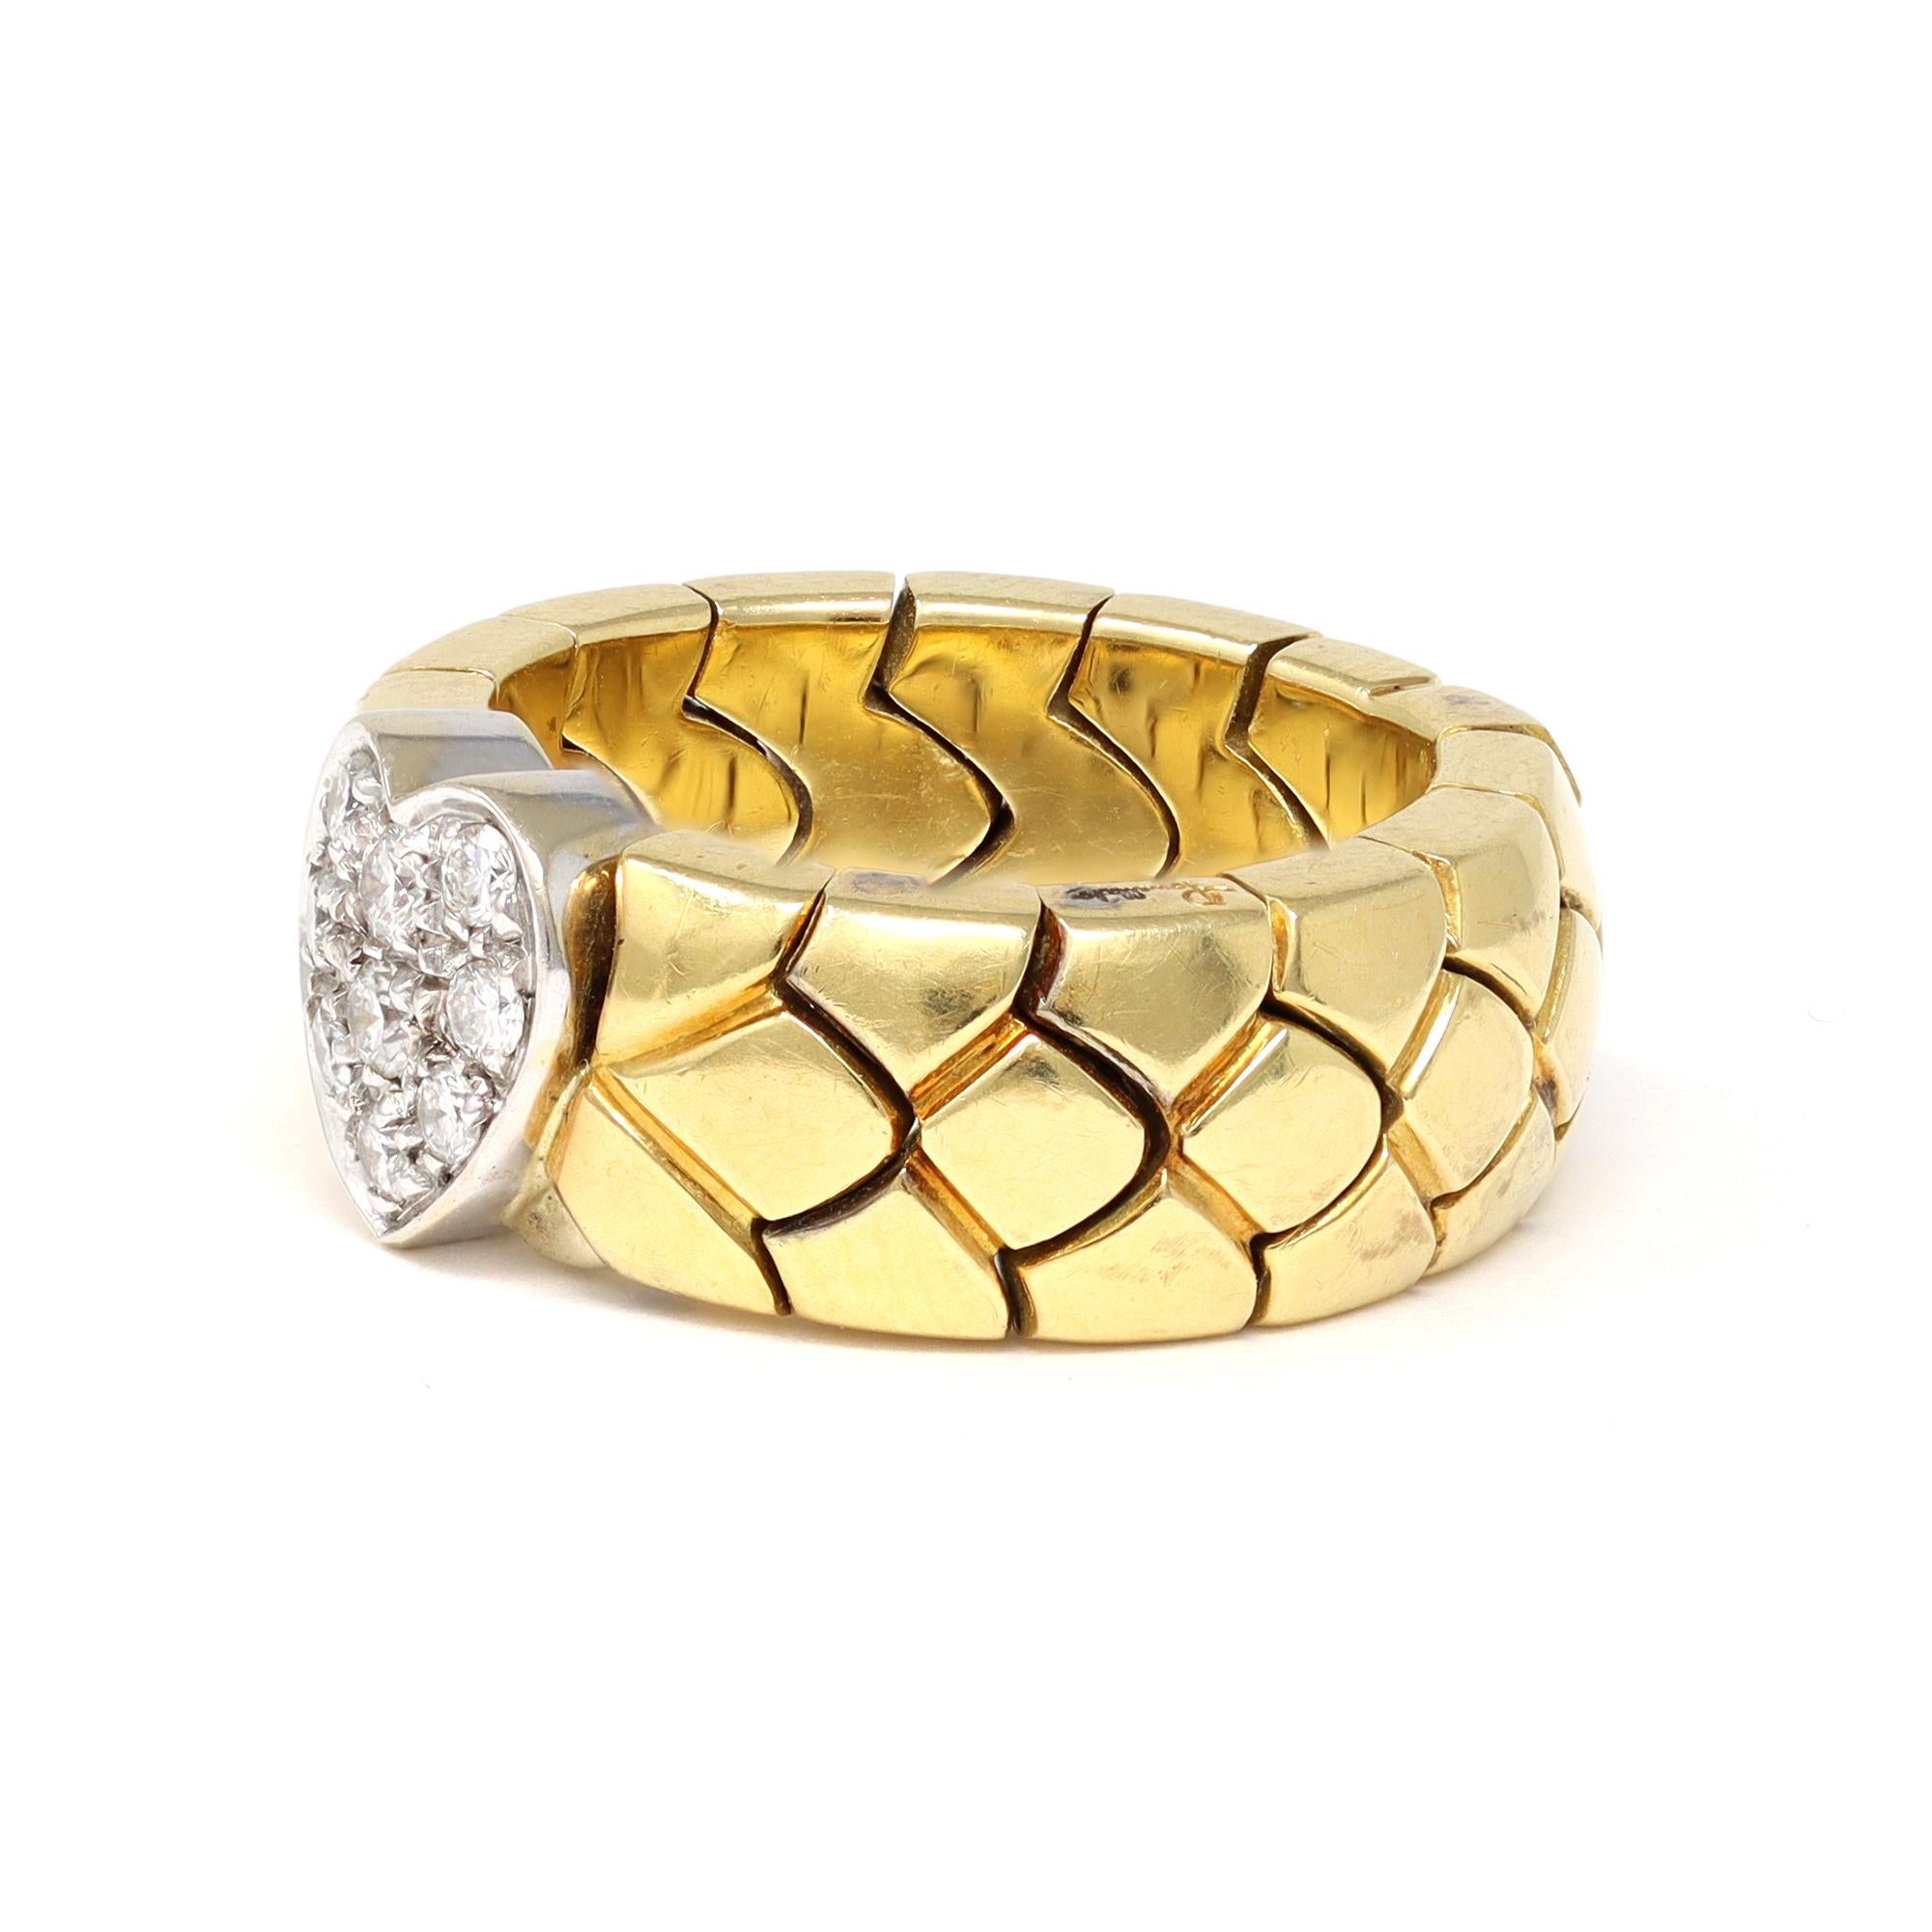 A semi-flexible duo-tone band ring signed by the famous house of Jewelry Pomellato. It features an 18-karat yellow gold flexible link and a diamond heart atop set in 18-karat white gold. The diamonds have 0.20 carats, GH color, and VS clarity. It